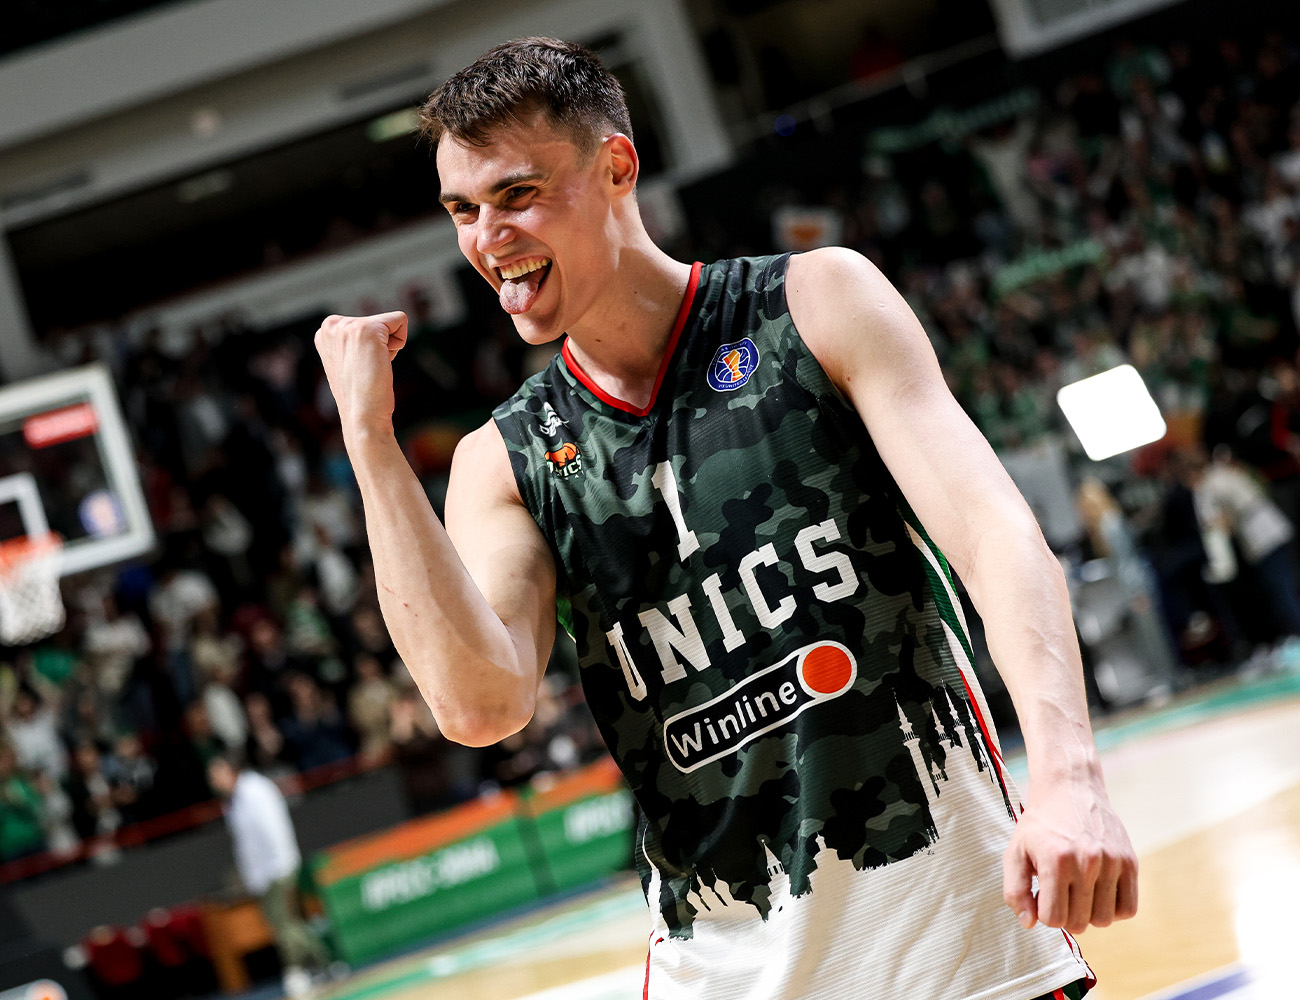 UNICS beat Loko in Game 7 and advances to the Finals